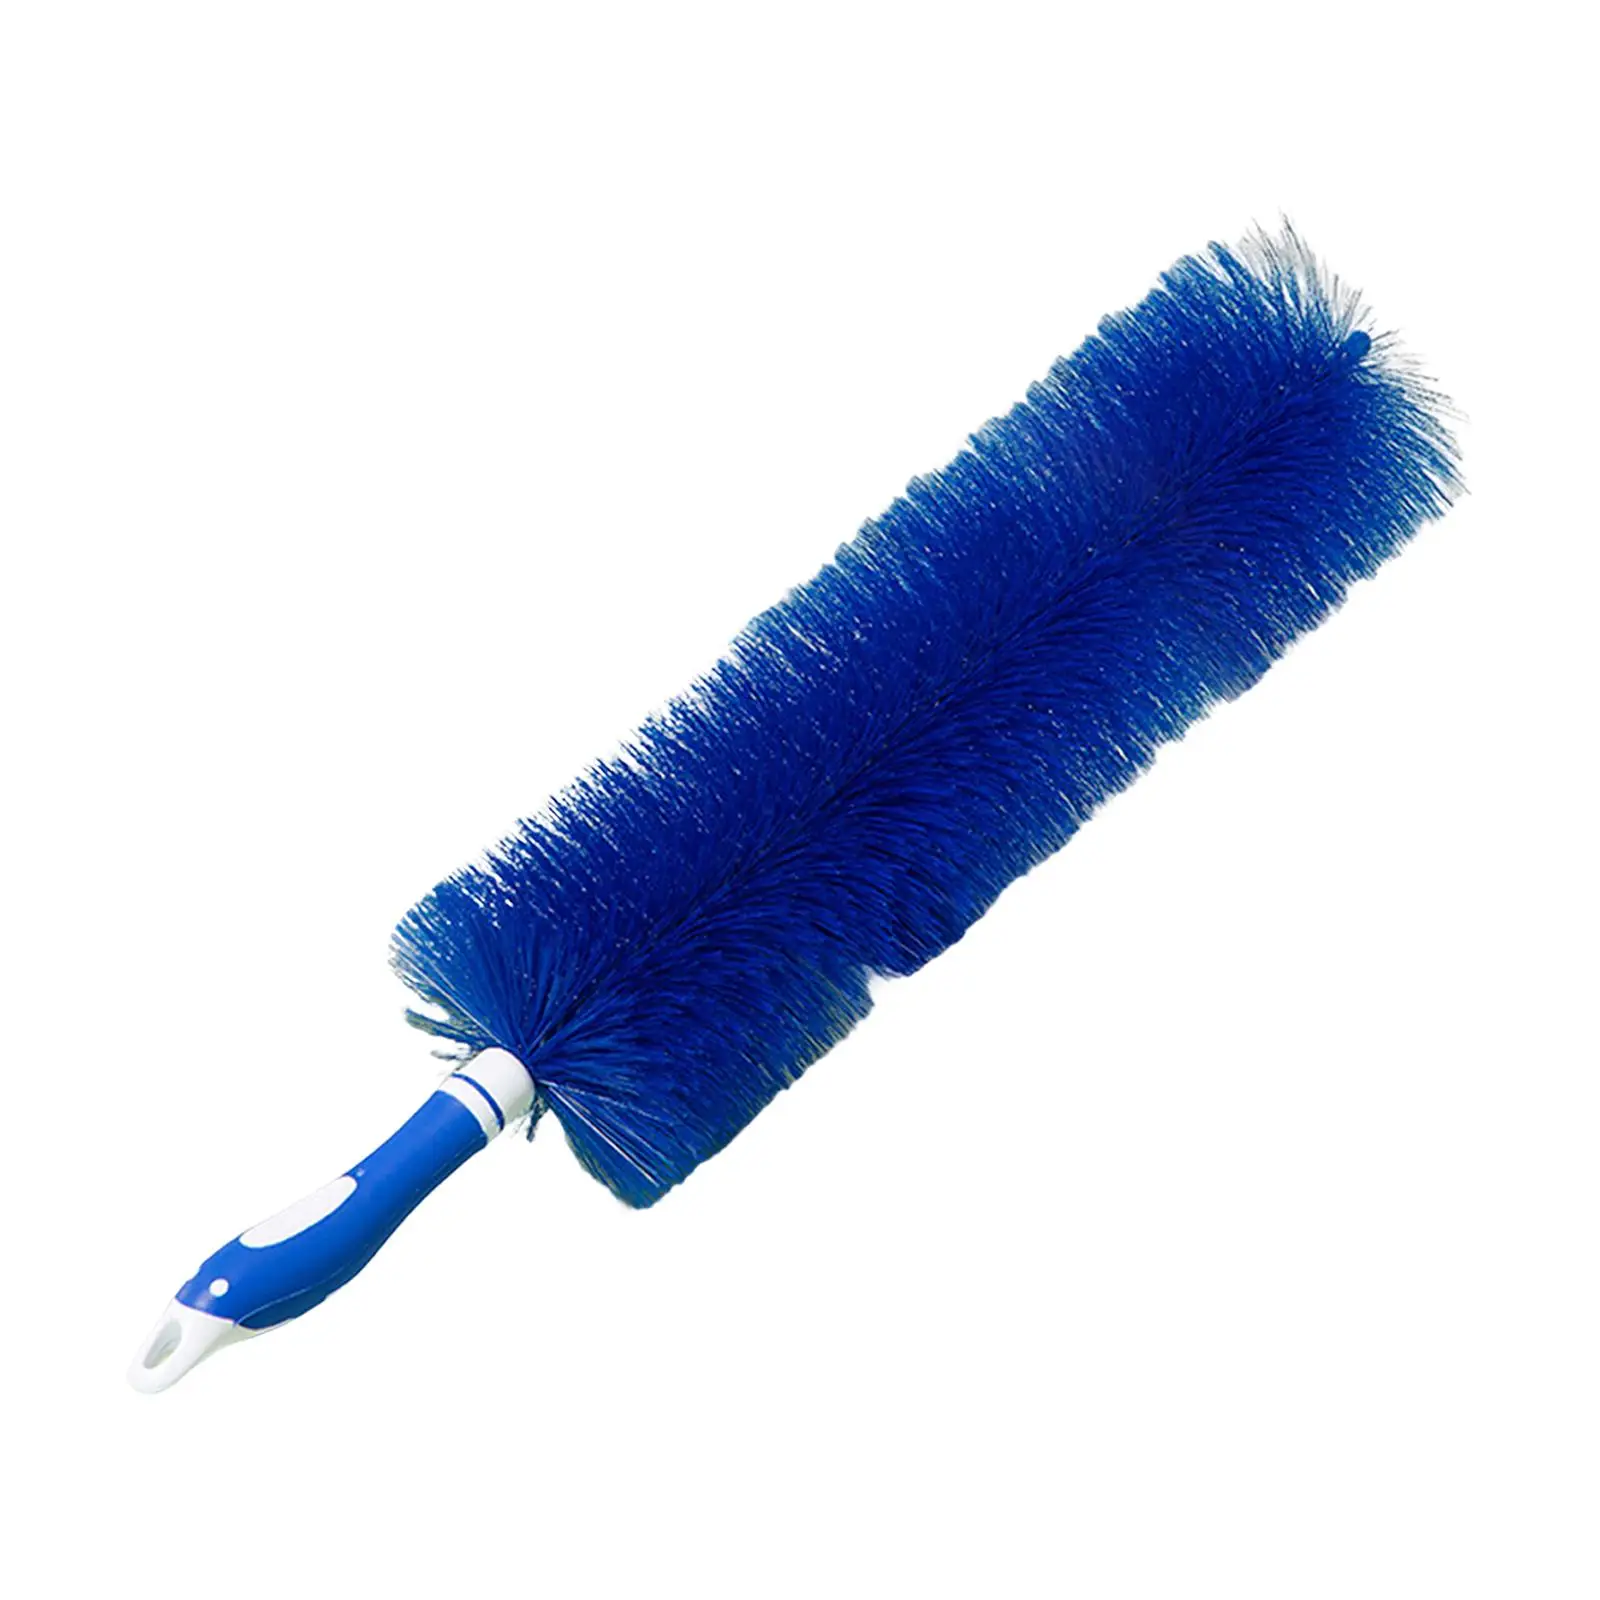 Duster Brush Cleaning Duster for Household Electrical Dust Removal Window